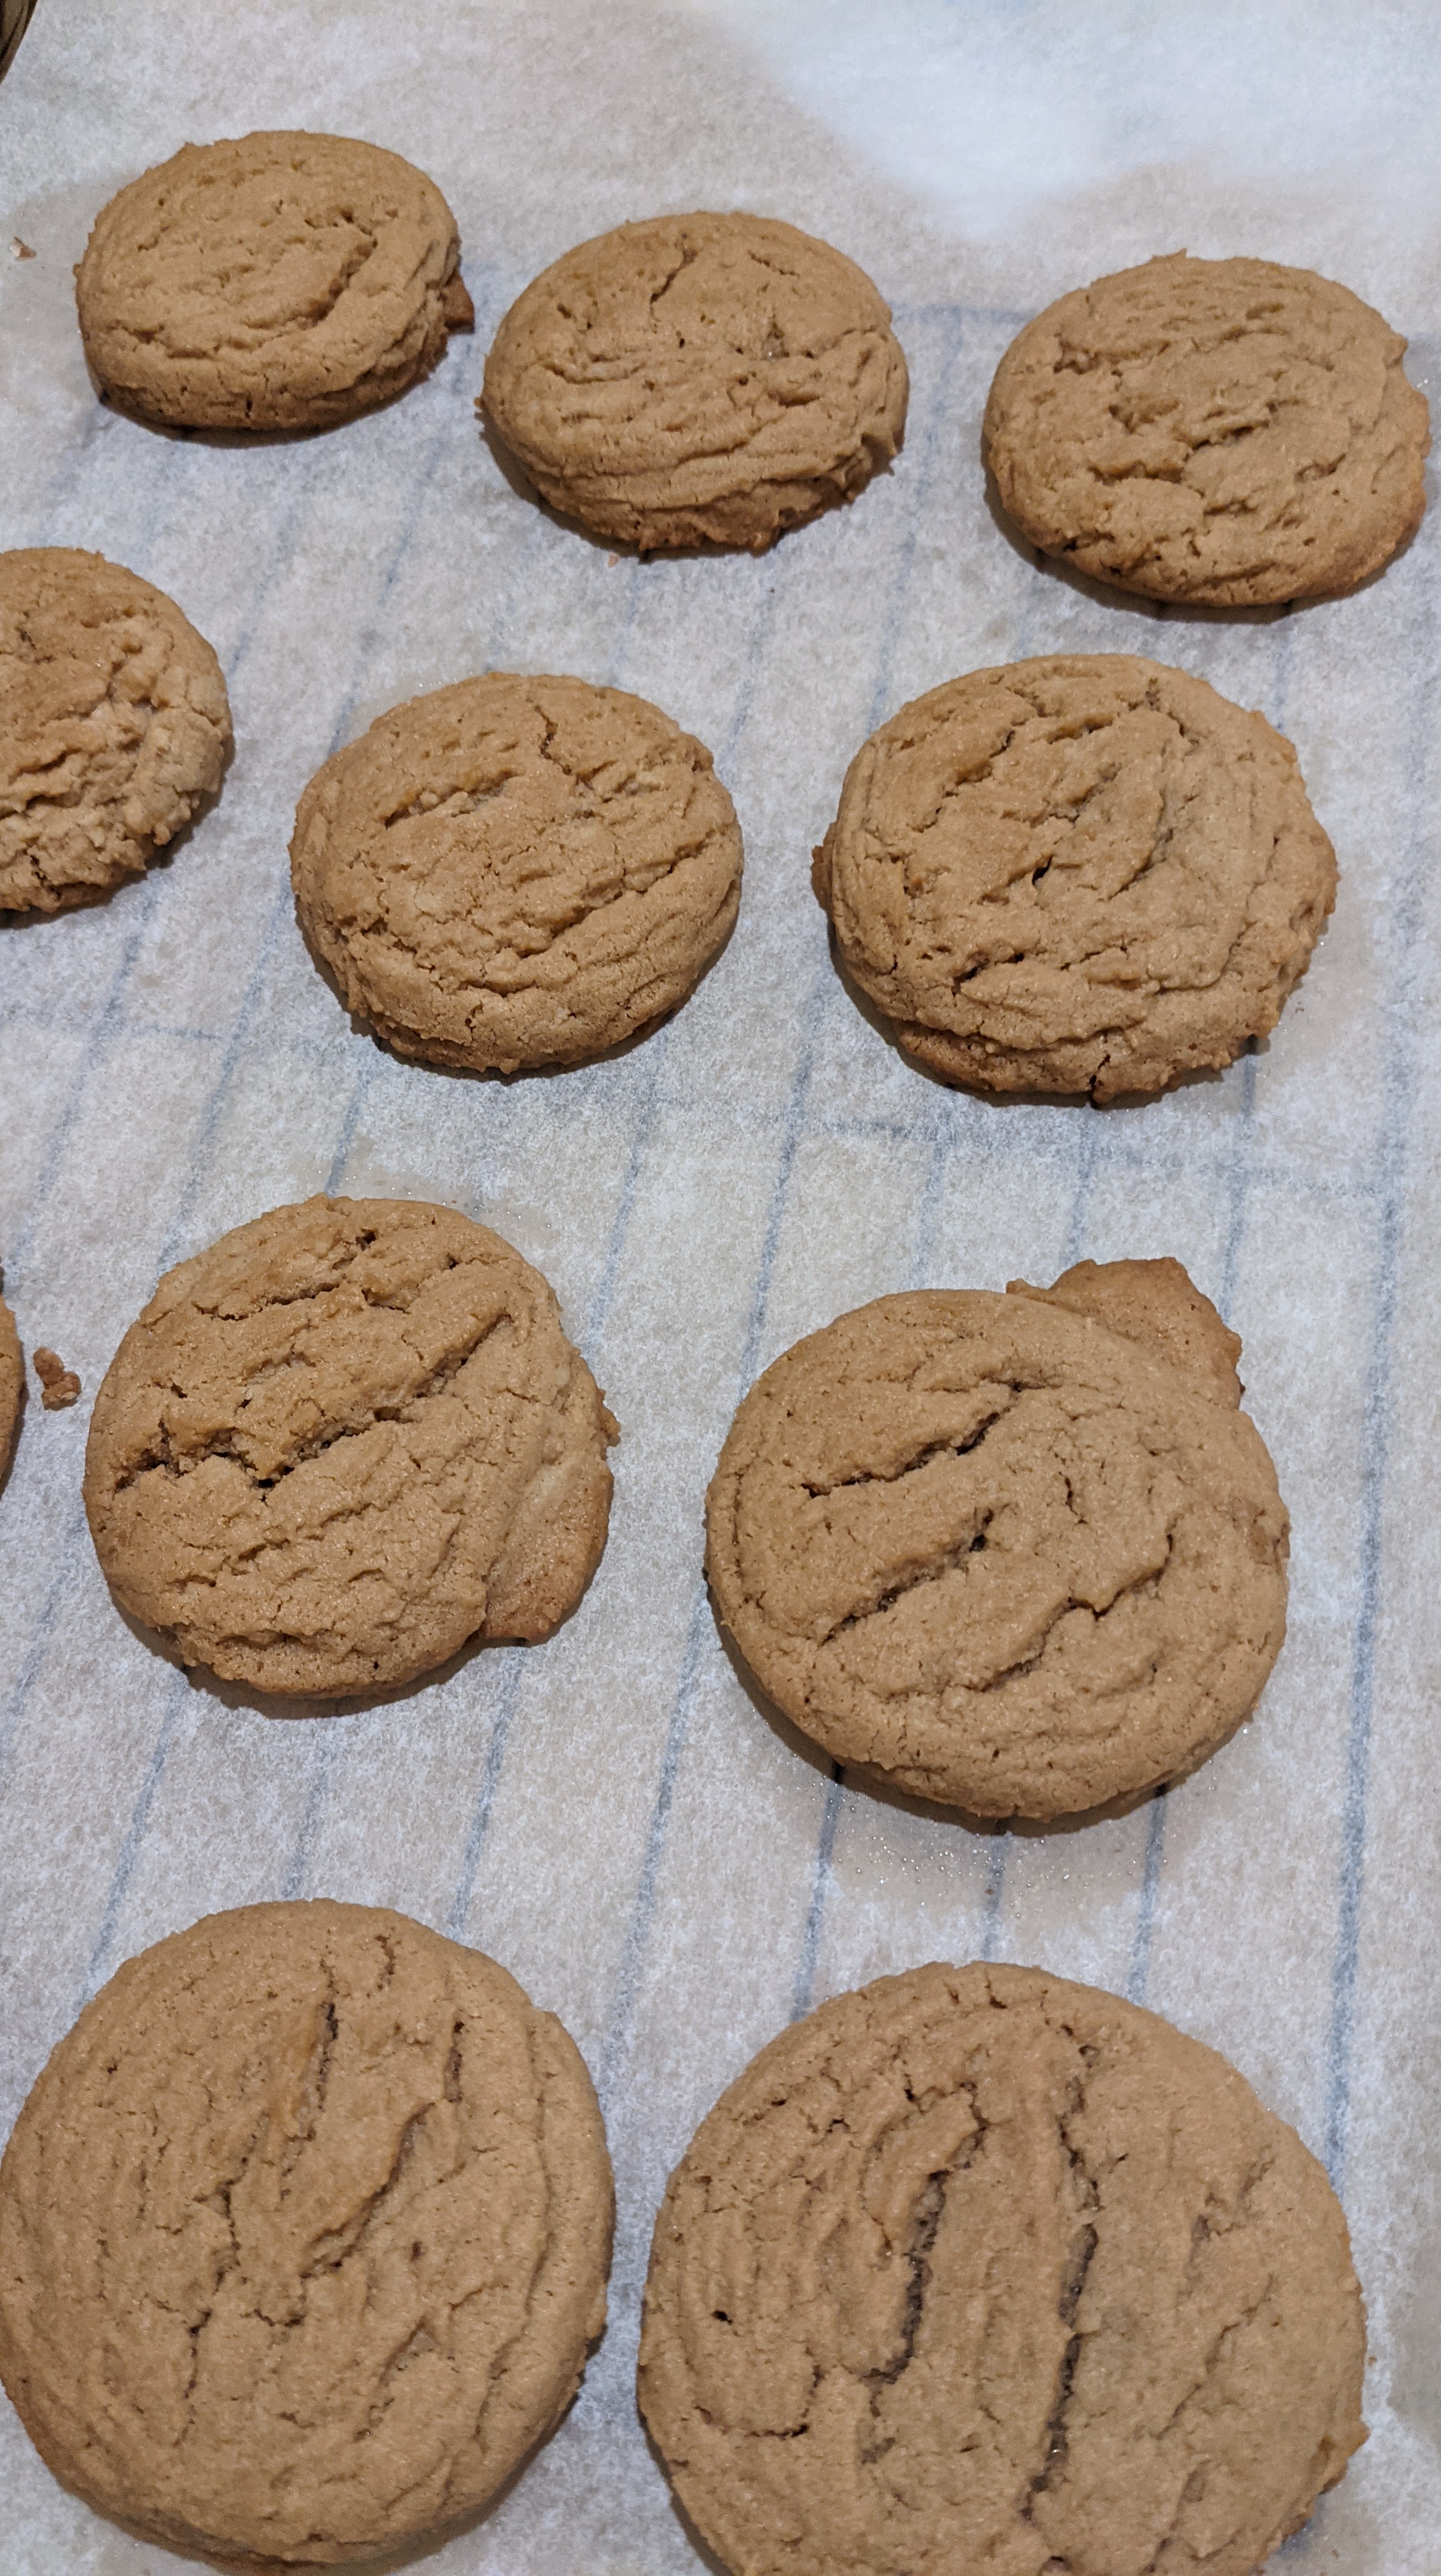 Perfectly round peanut butter cookies